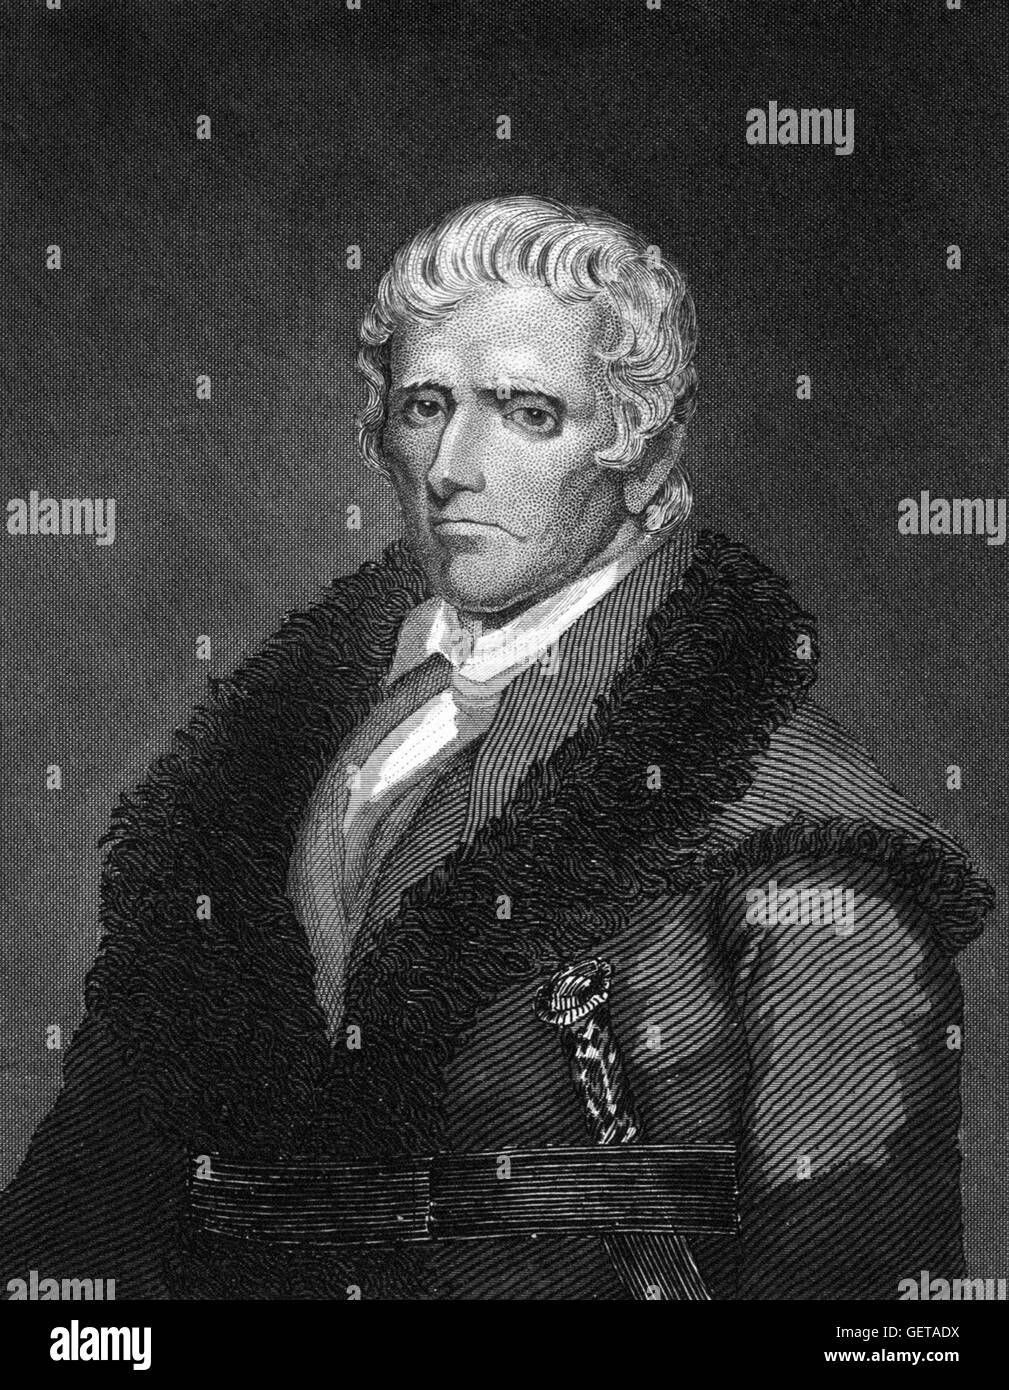 Daniel Boone (1734-1820), an American pioneer frontiersman, most famous for his exploration and settlement of what is now Kentucky. Stock Photo